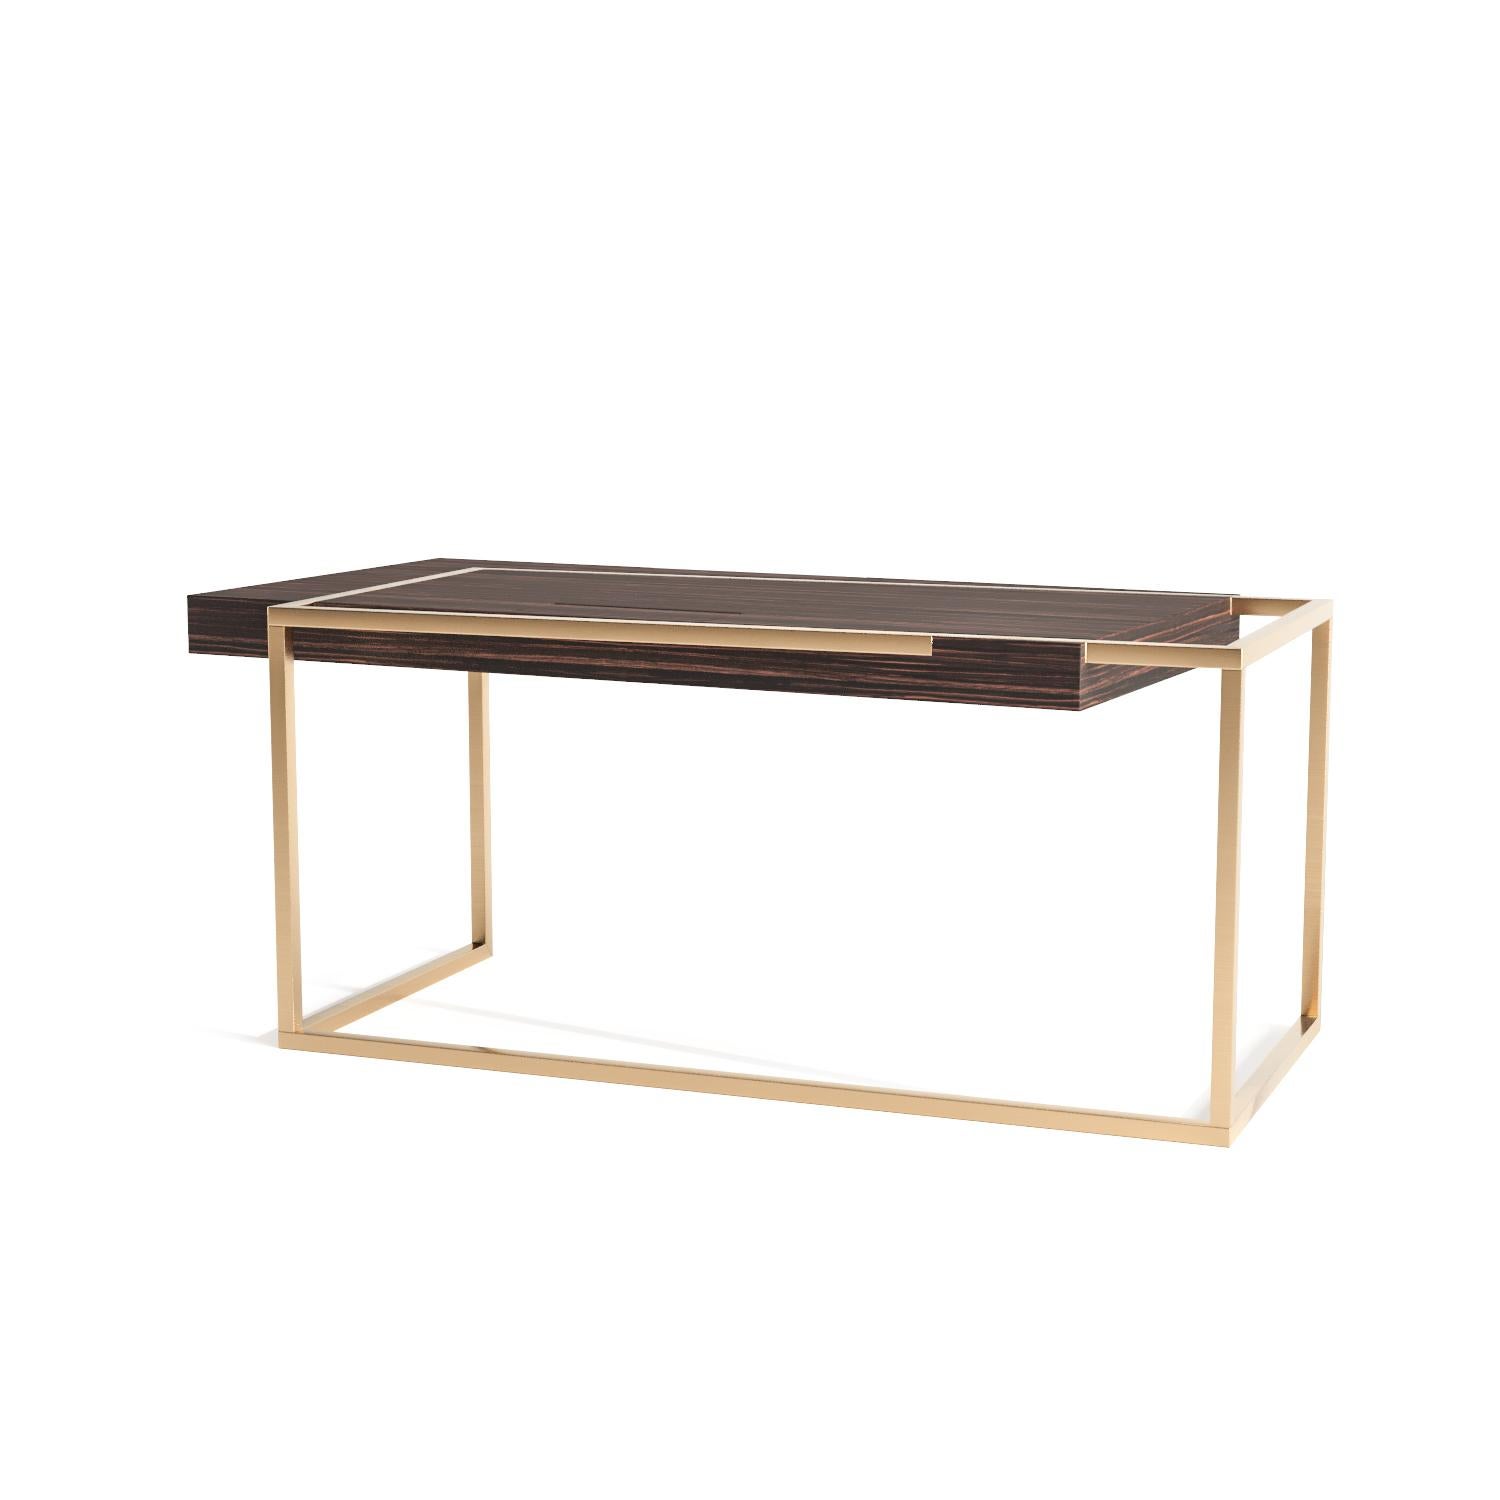 Portuguese Modern Home Office Writing Executive Desk Ebony Macassar Wood and Brushed Brass For Sale